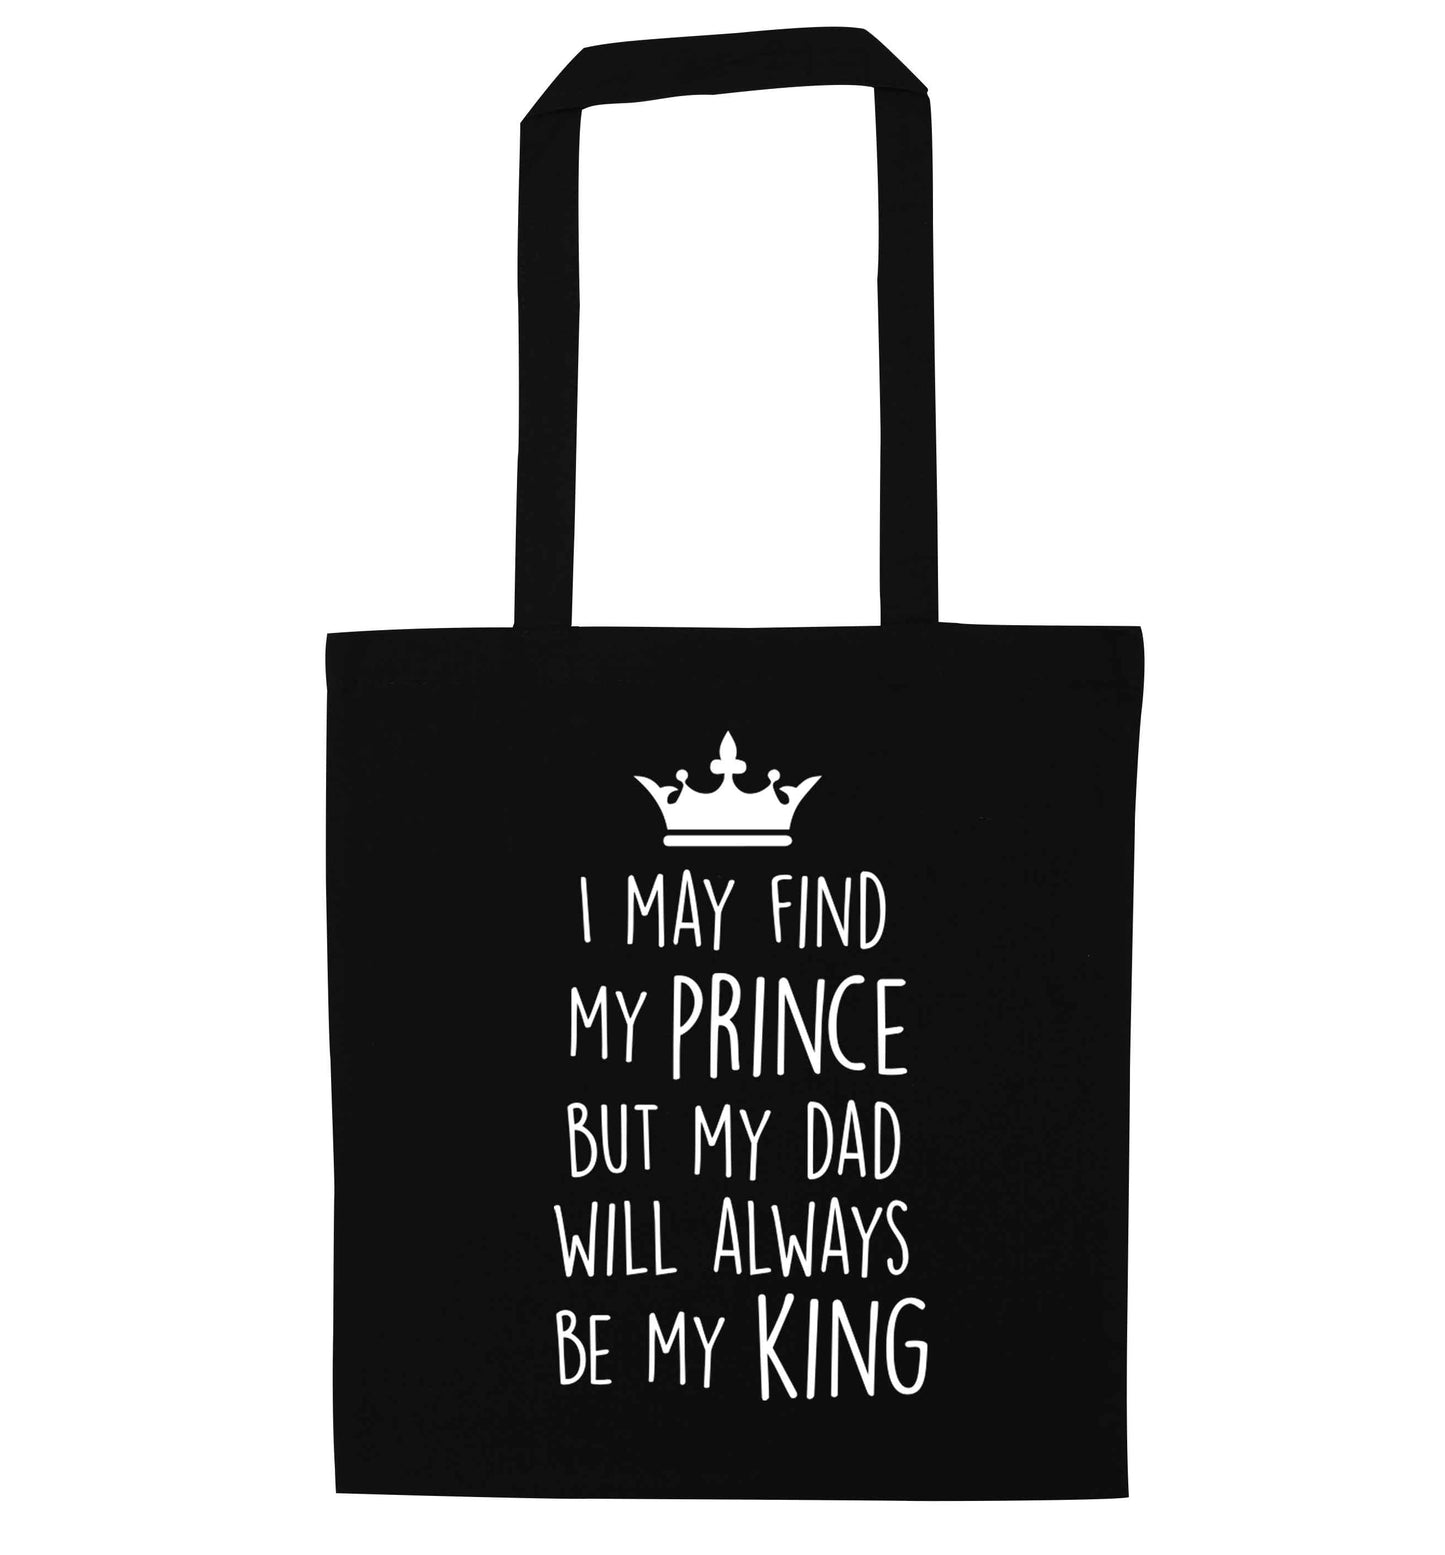 I may find my prince but my dad will always be my king black tote bag